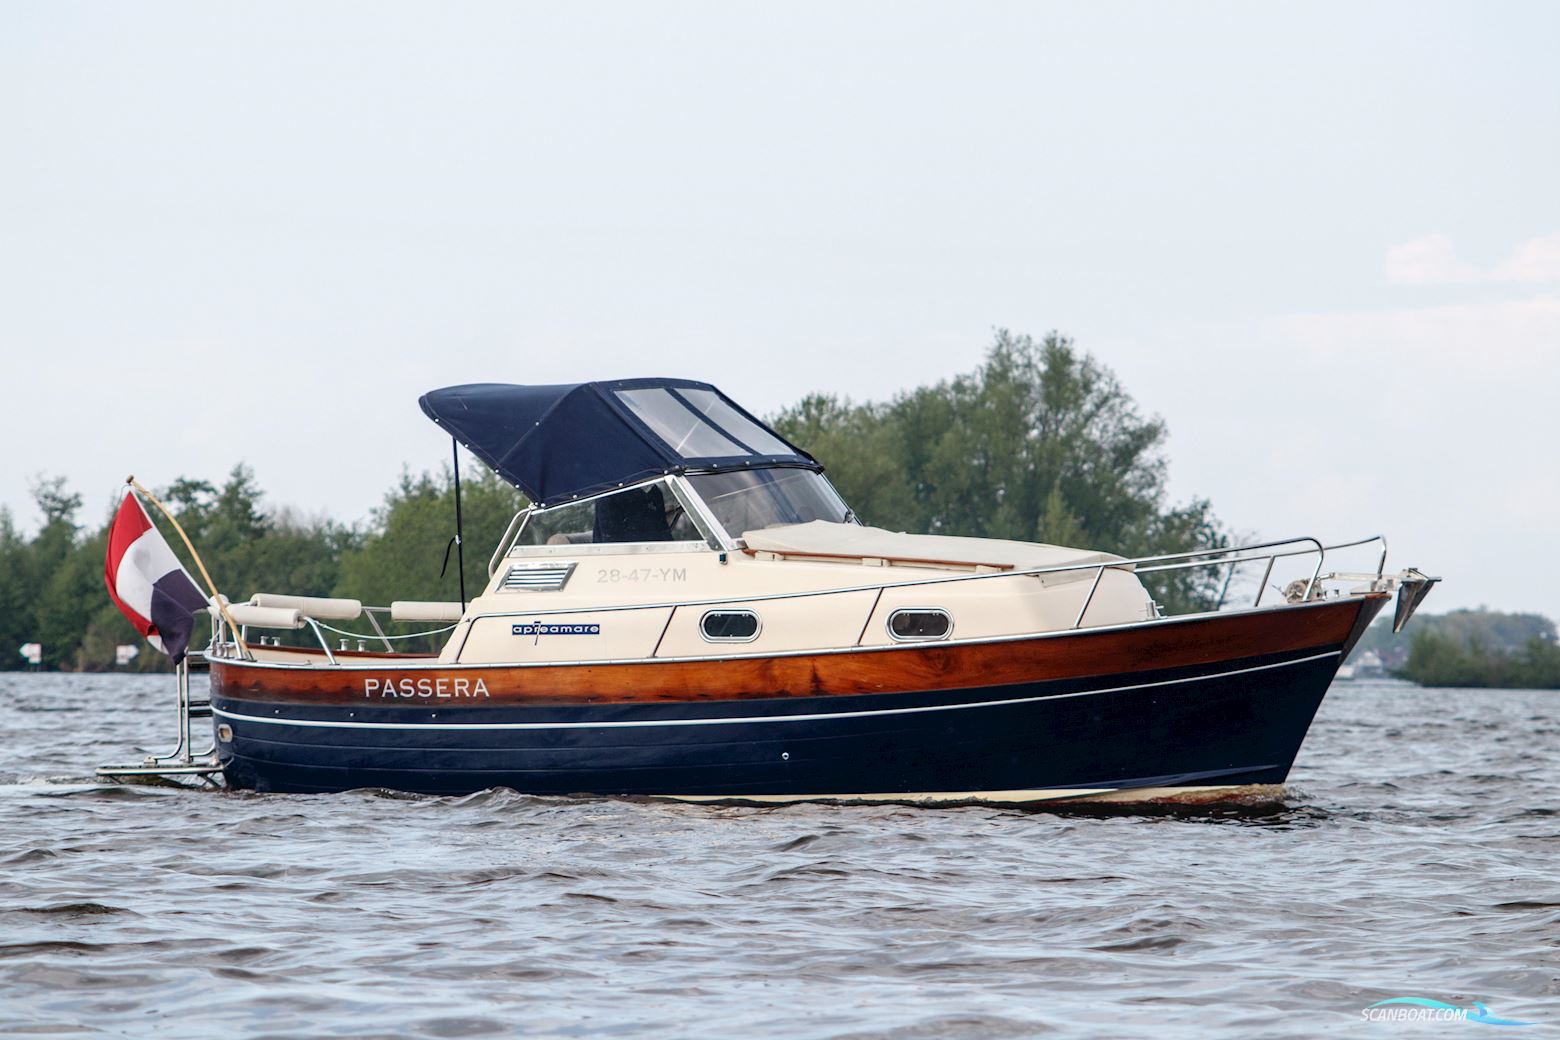 Apreamare 7 Cabinato Sailing boat 1997, with VM Diesel engine, The Netherlands